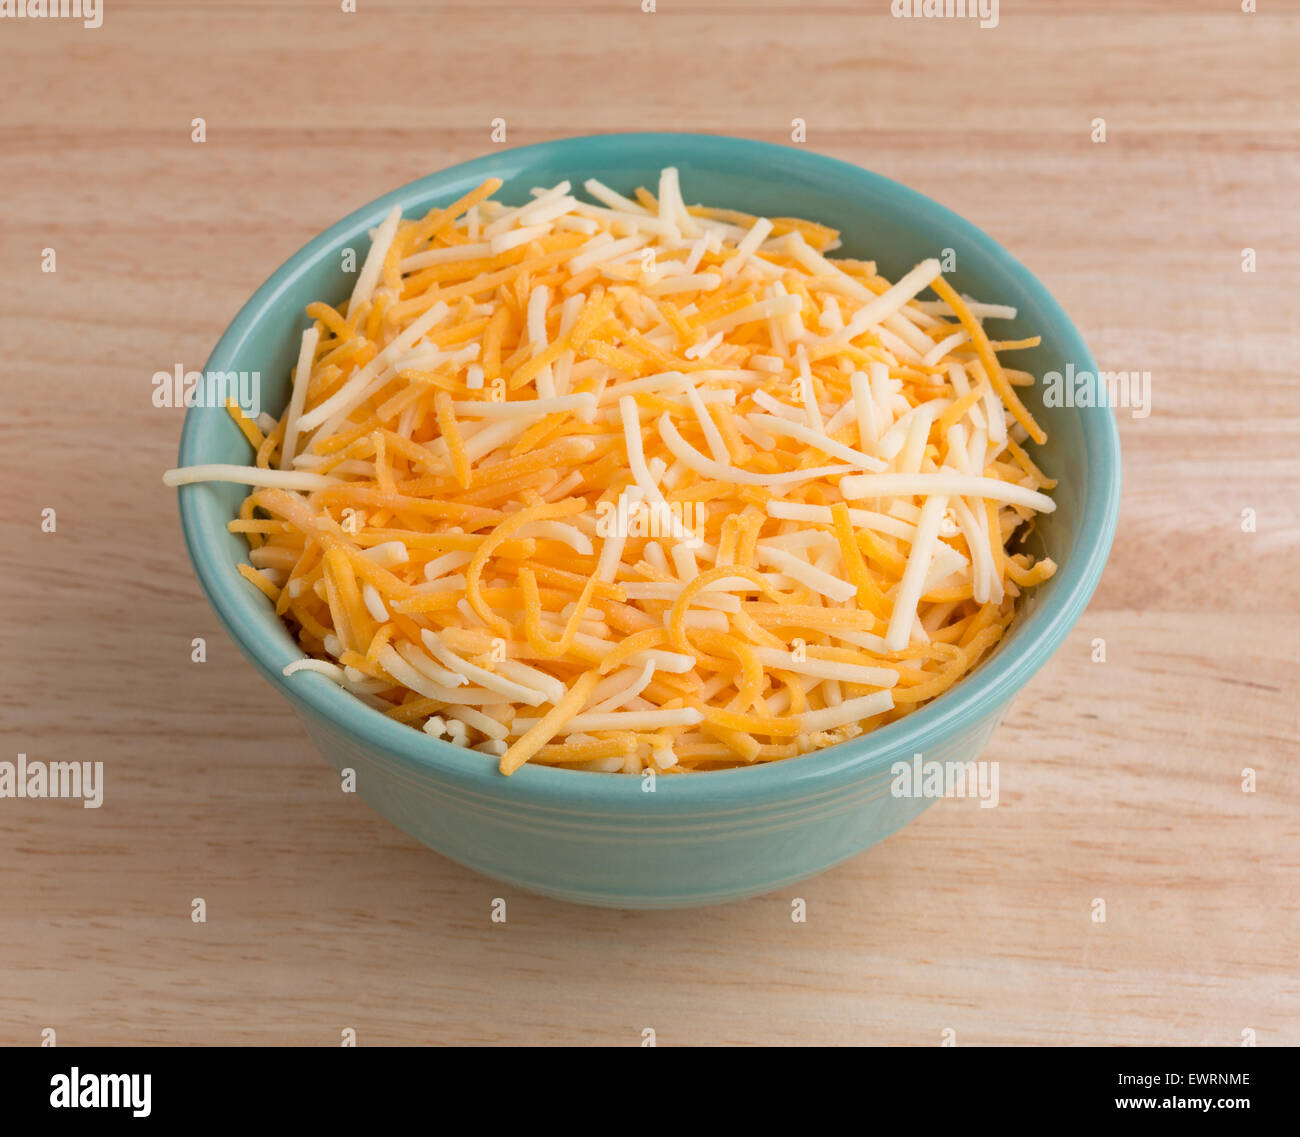 A small bowl filled with shredded white cheddar, sharp cheddar and mild cheddar cheeses atop a wood table top. Stock Photo